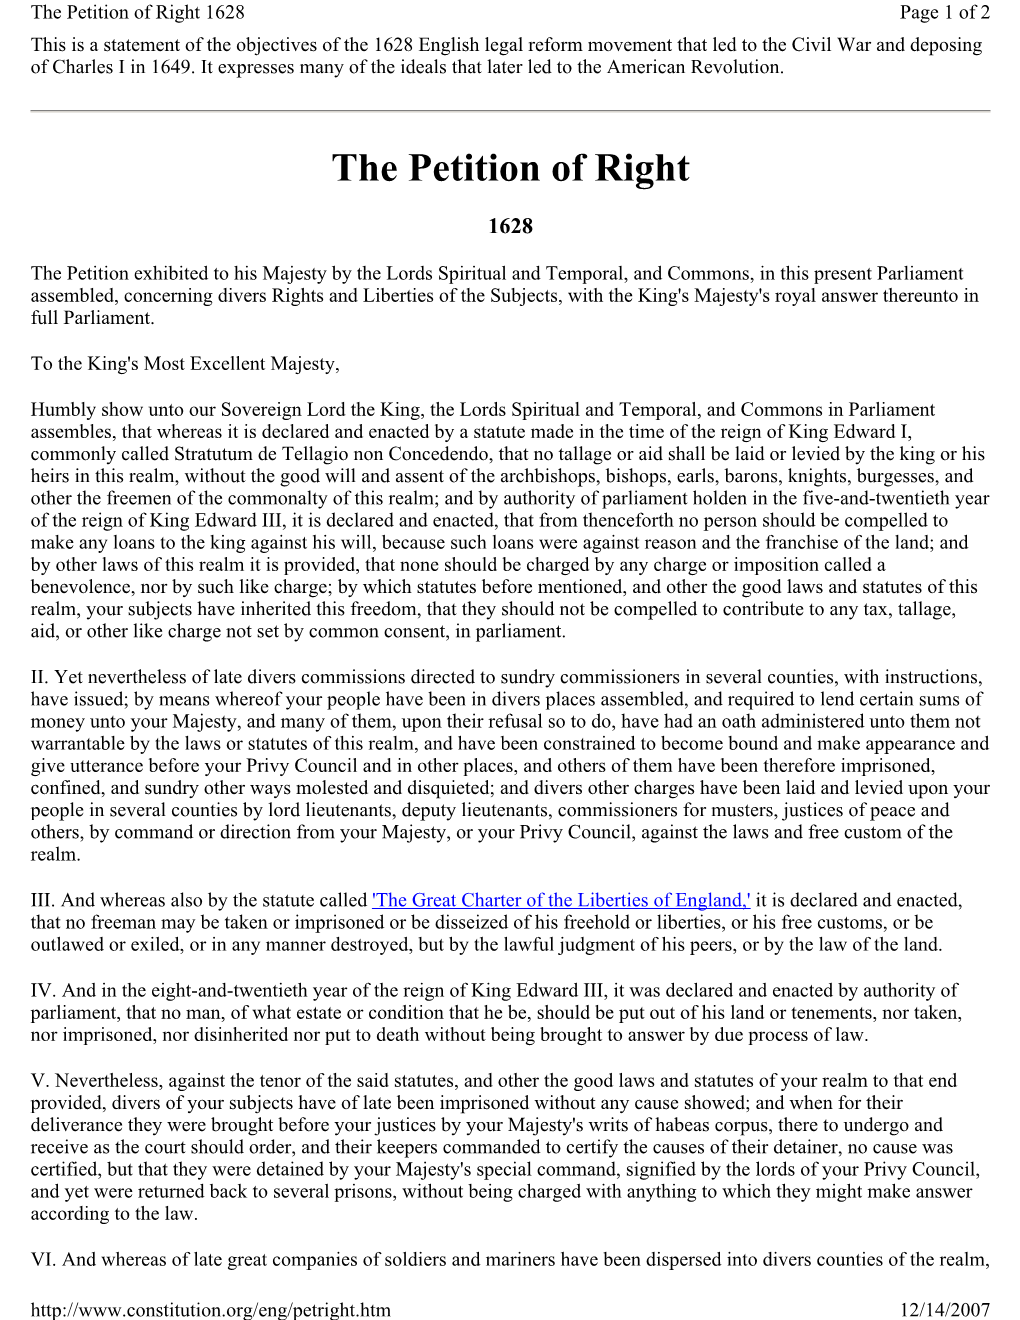 The Petition of Right